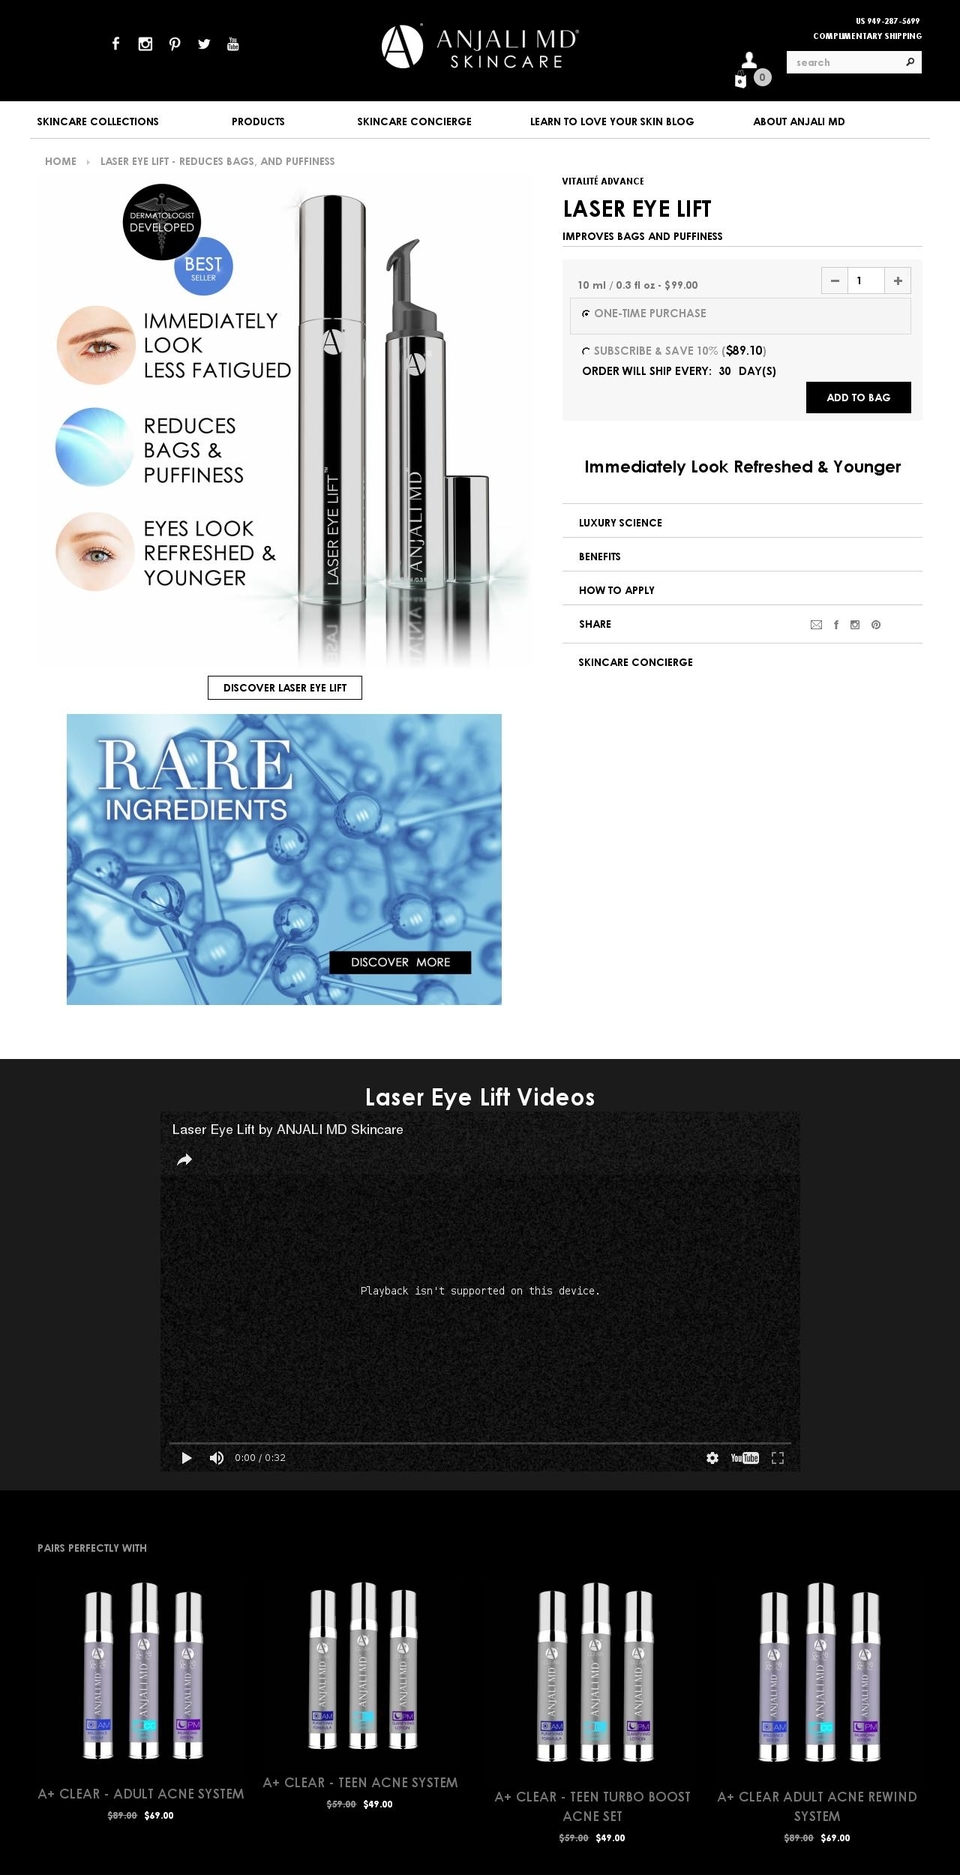 ANJALI MD - NEW SITE (ELLA) Shopify theme site example lasereyelift.net